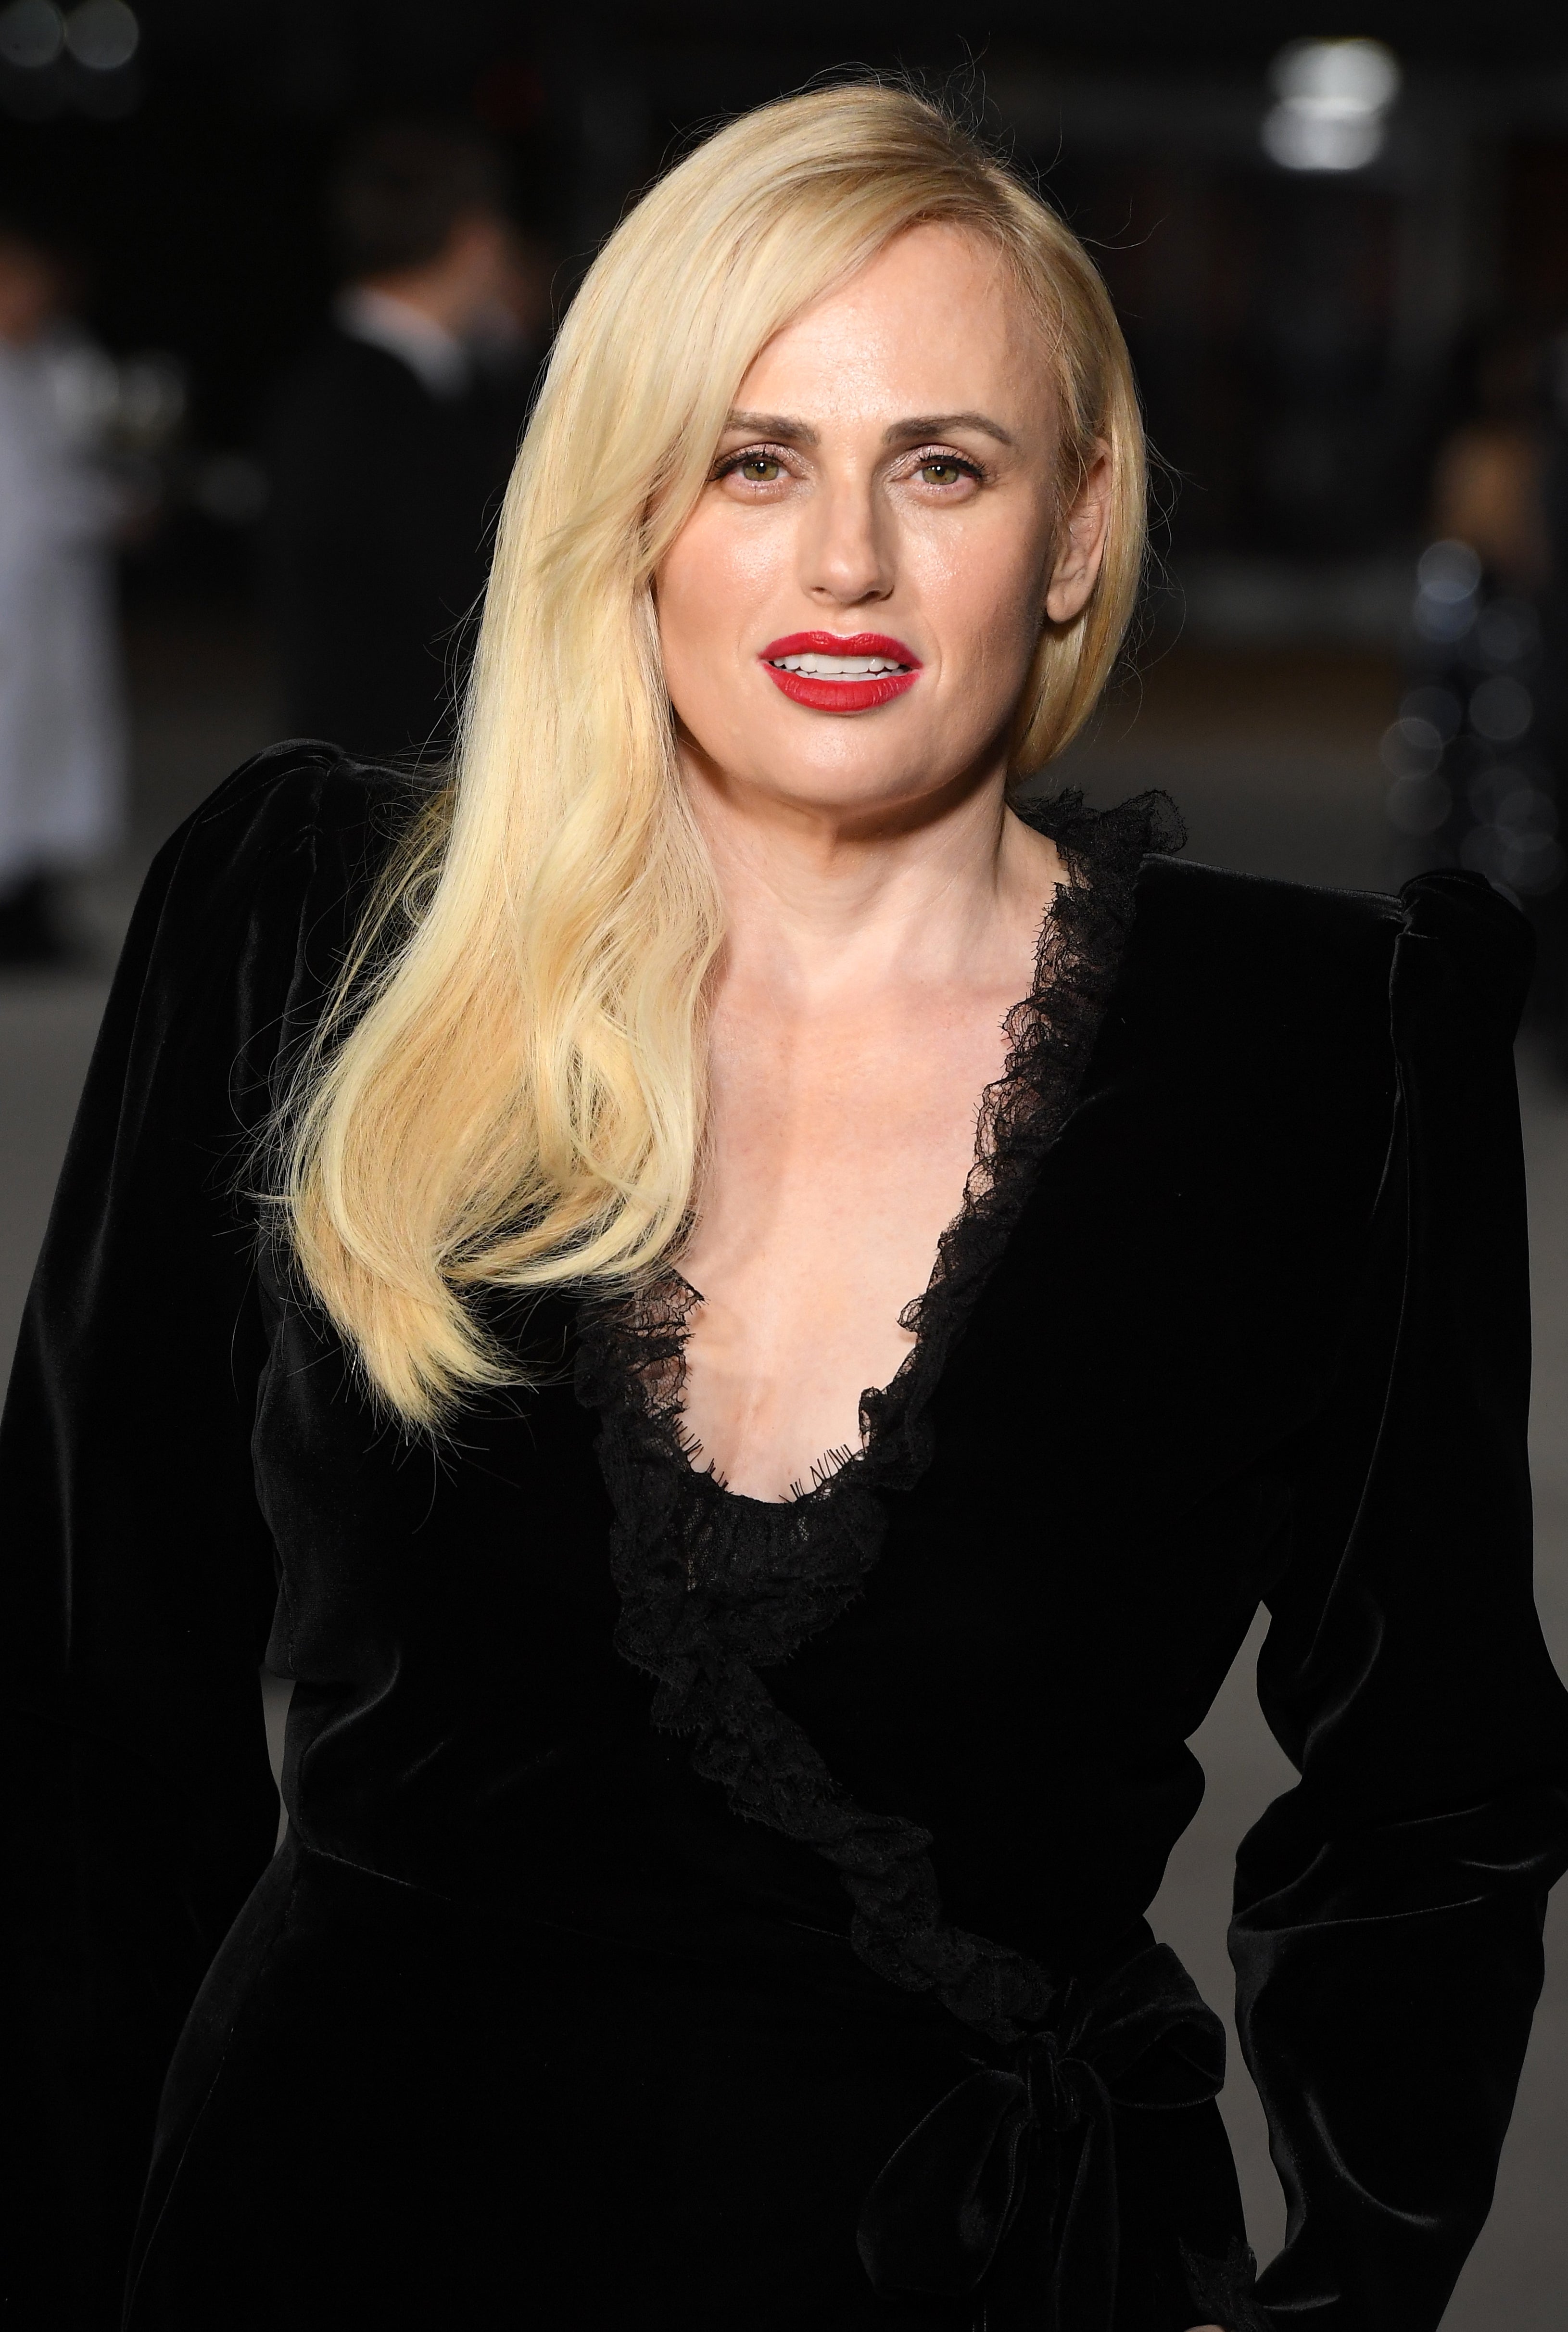 Rebel Wilson wearing a long-sleeved dress with lace trimming, posing at an event